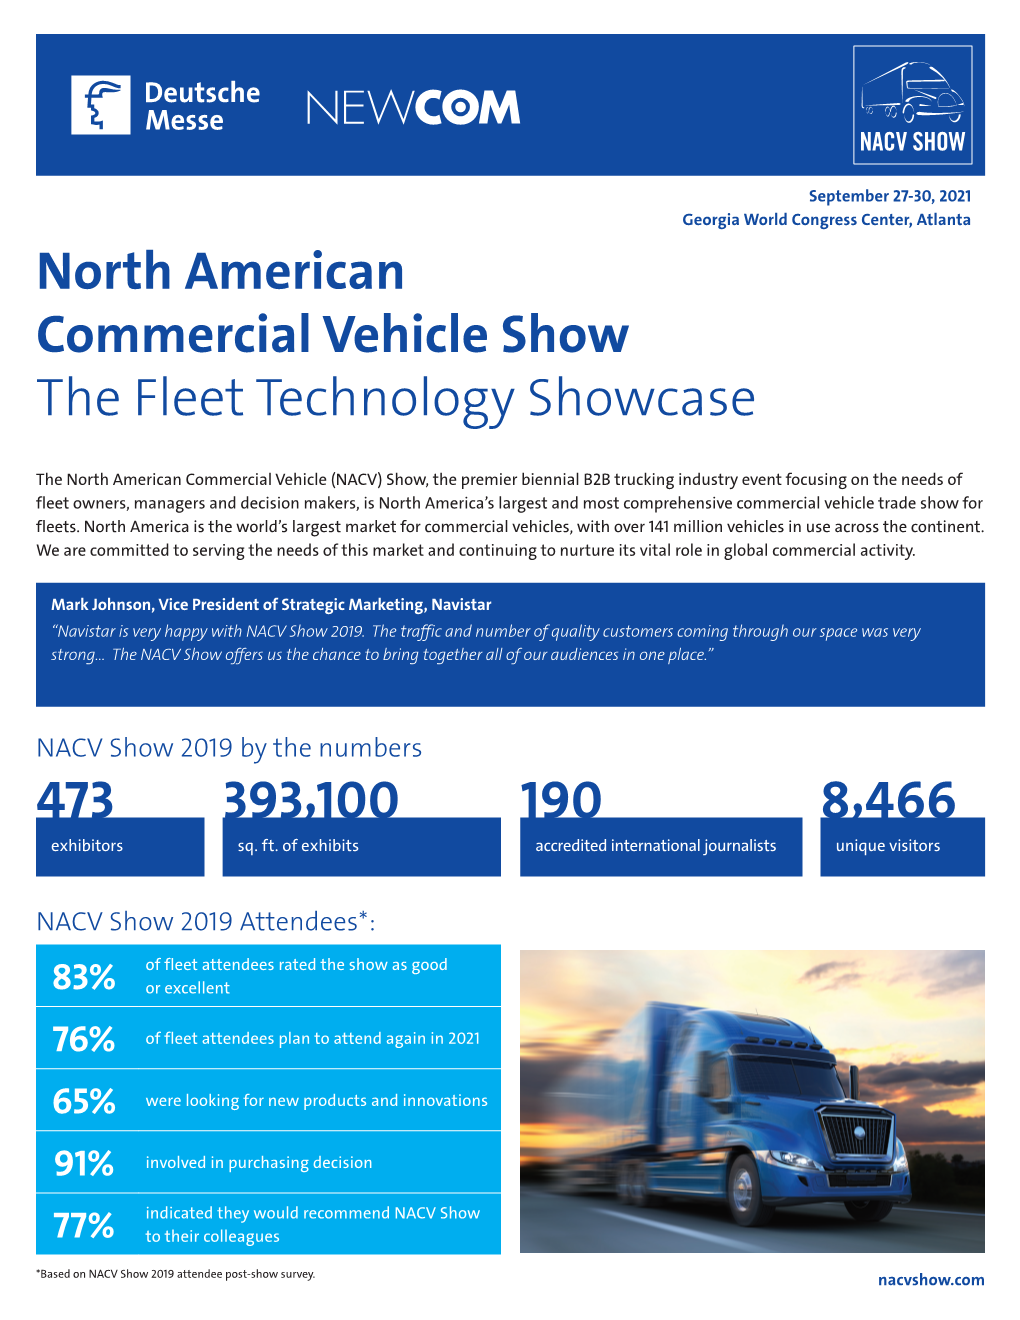 North American Commercial Vehicle Show the Fleet Technology Showcase